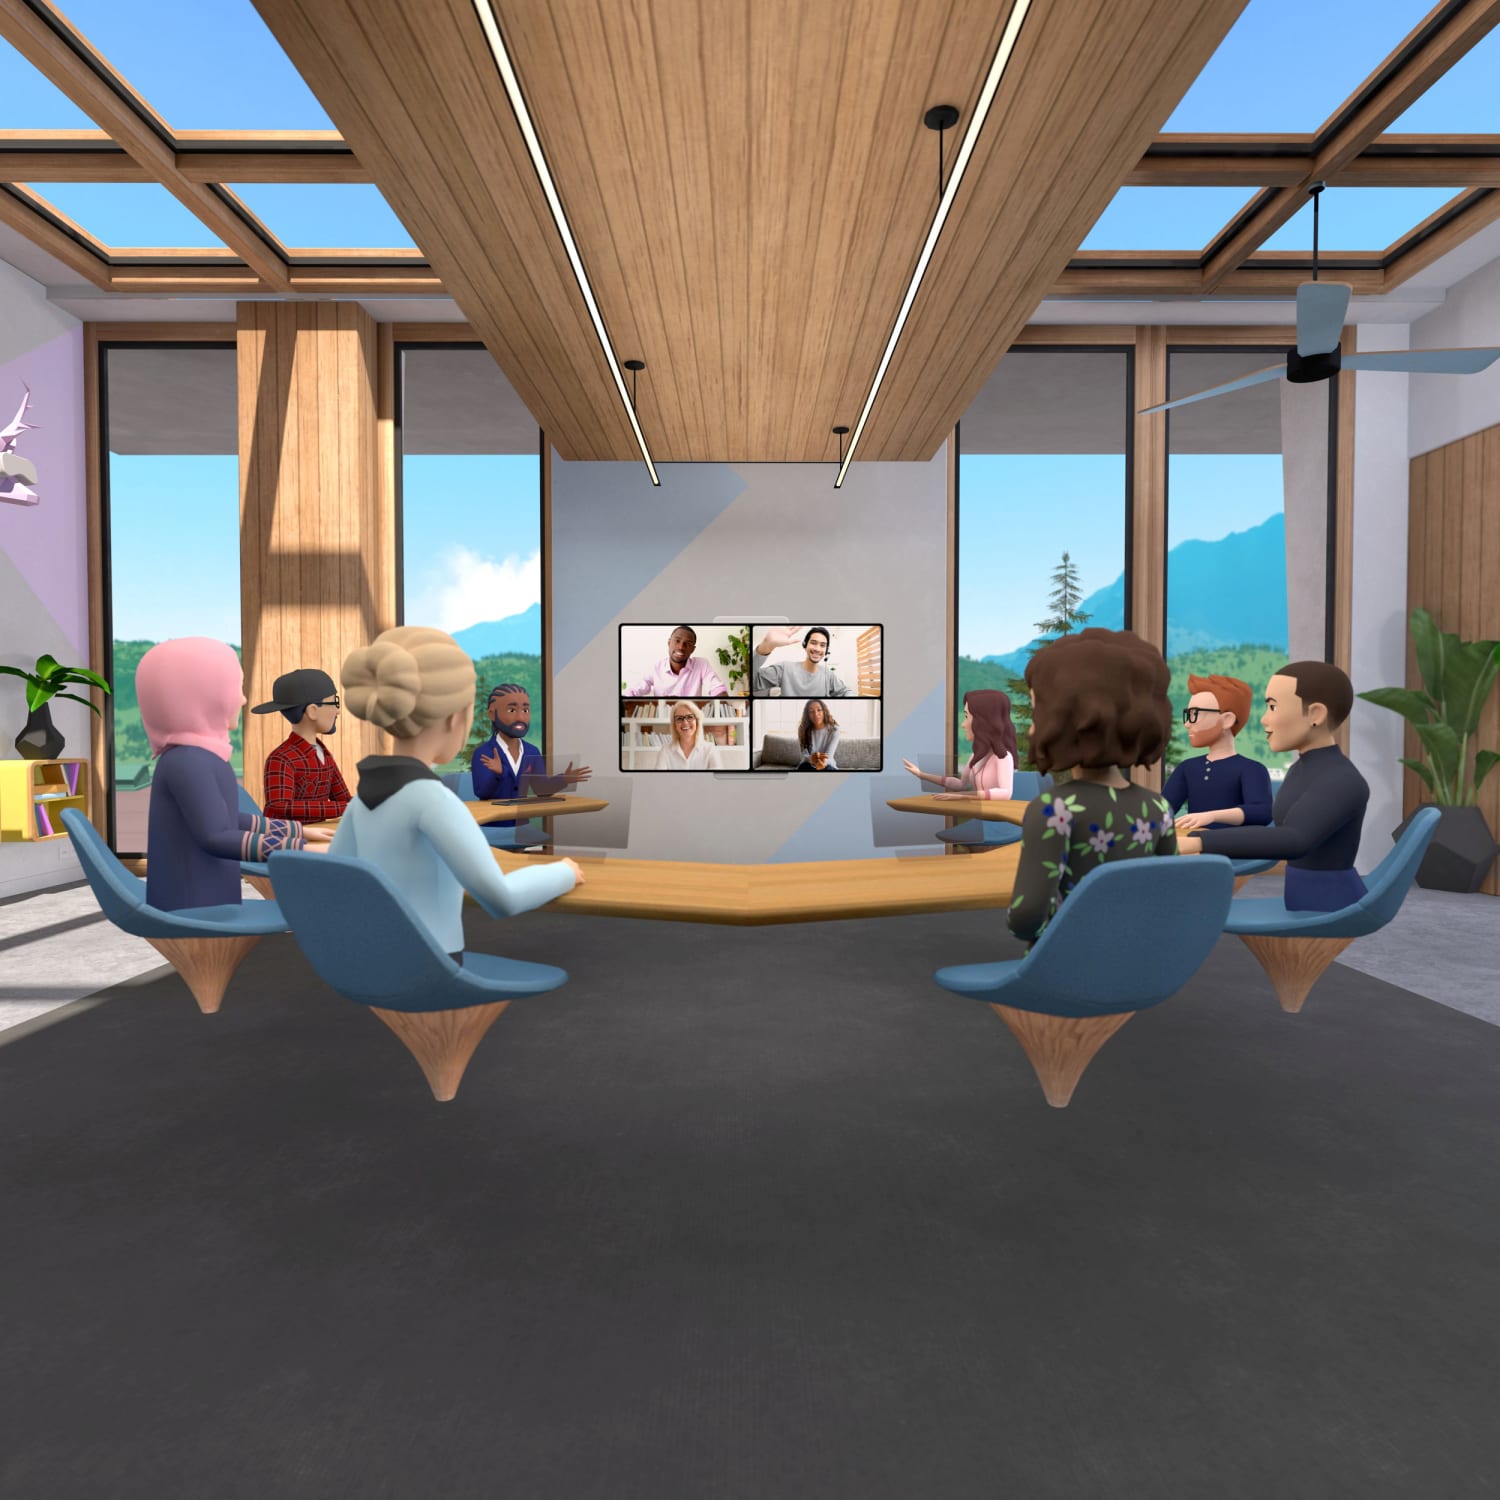 West Elm Creates a Metaverse Experience for Home Design on Roblox